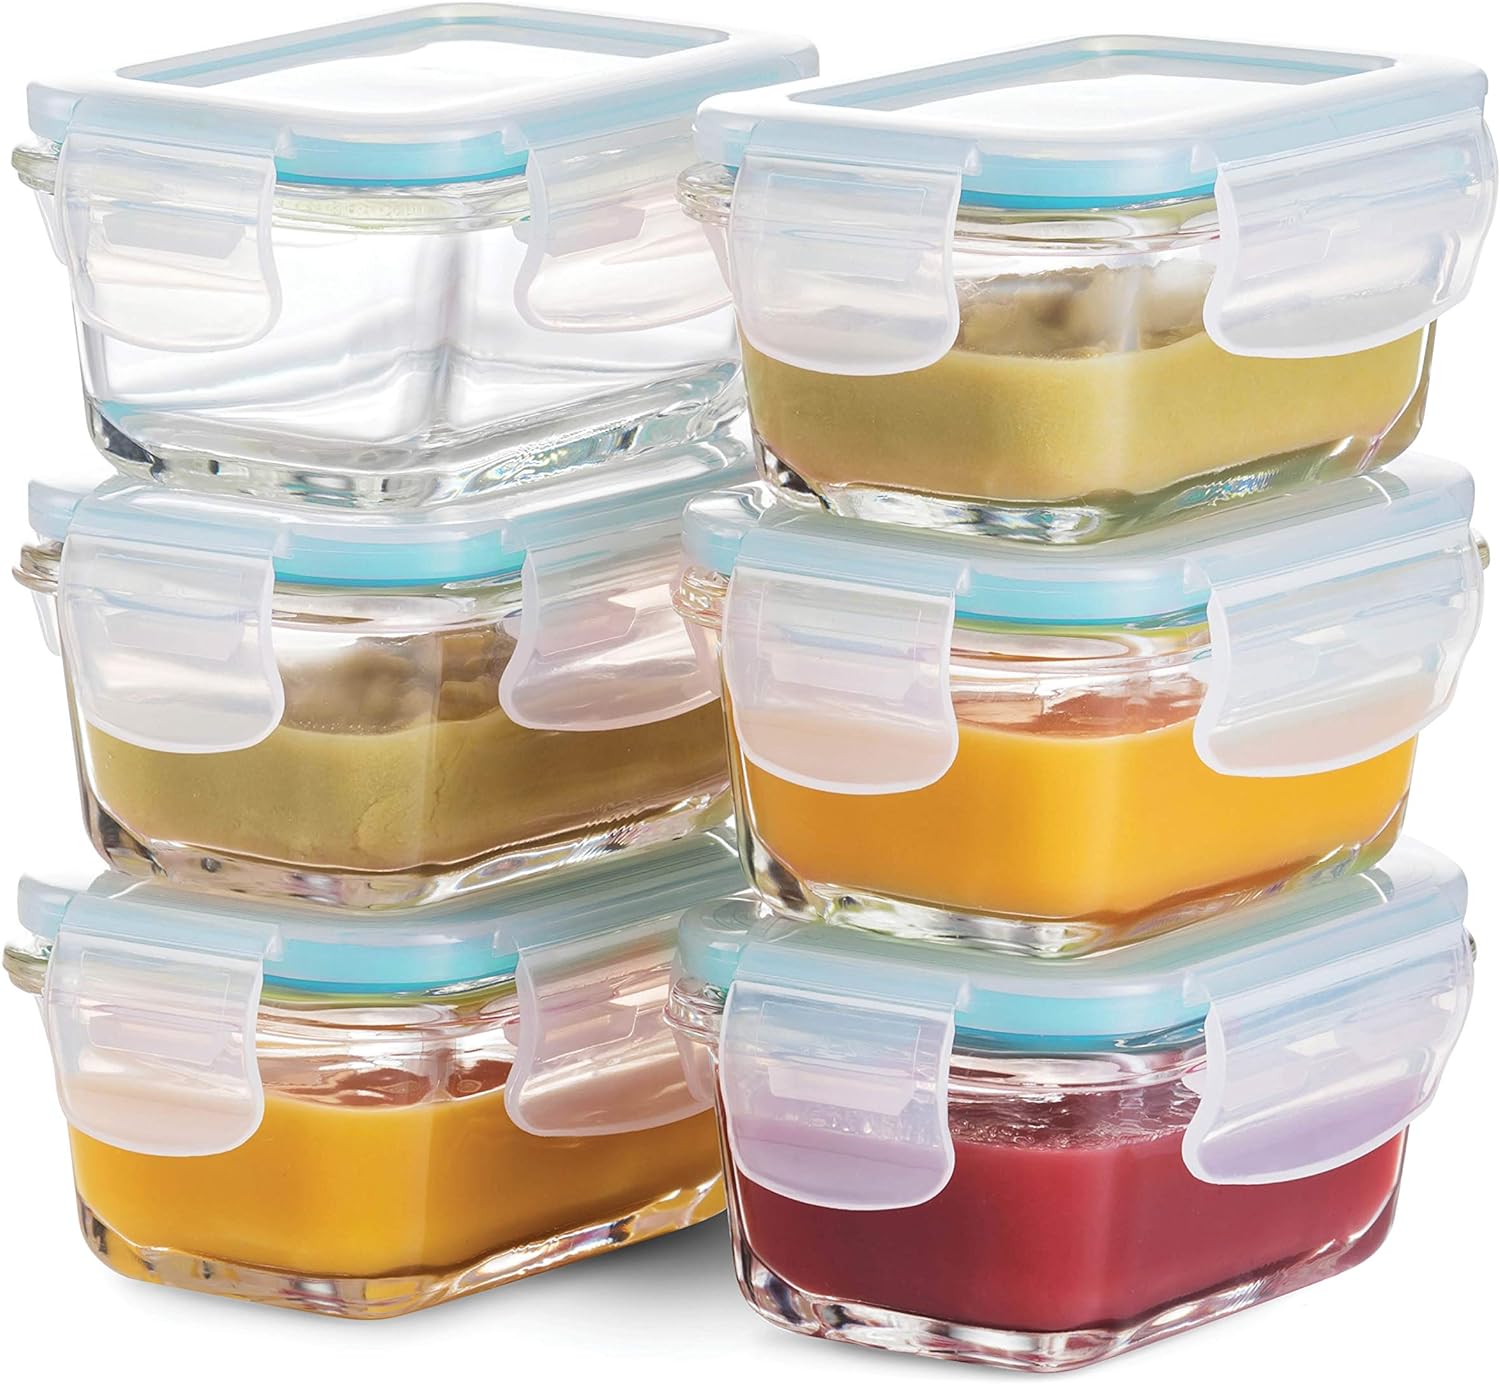 FineDine Glass Meal Prep Food Storage Container - Airtight, Leakproof, Microwave & Dishwasher Safe - Perfect for Snacks, Dips, and Meal Prep (Teal) 6 Count (Pack of 1)